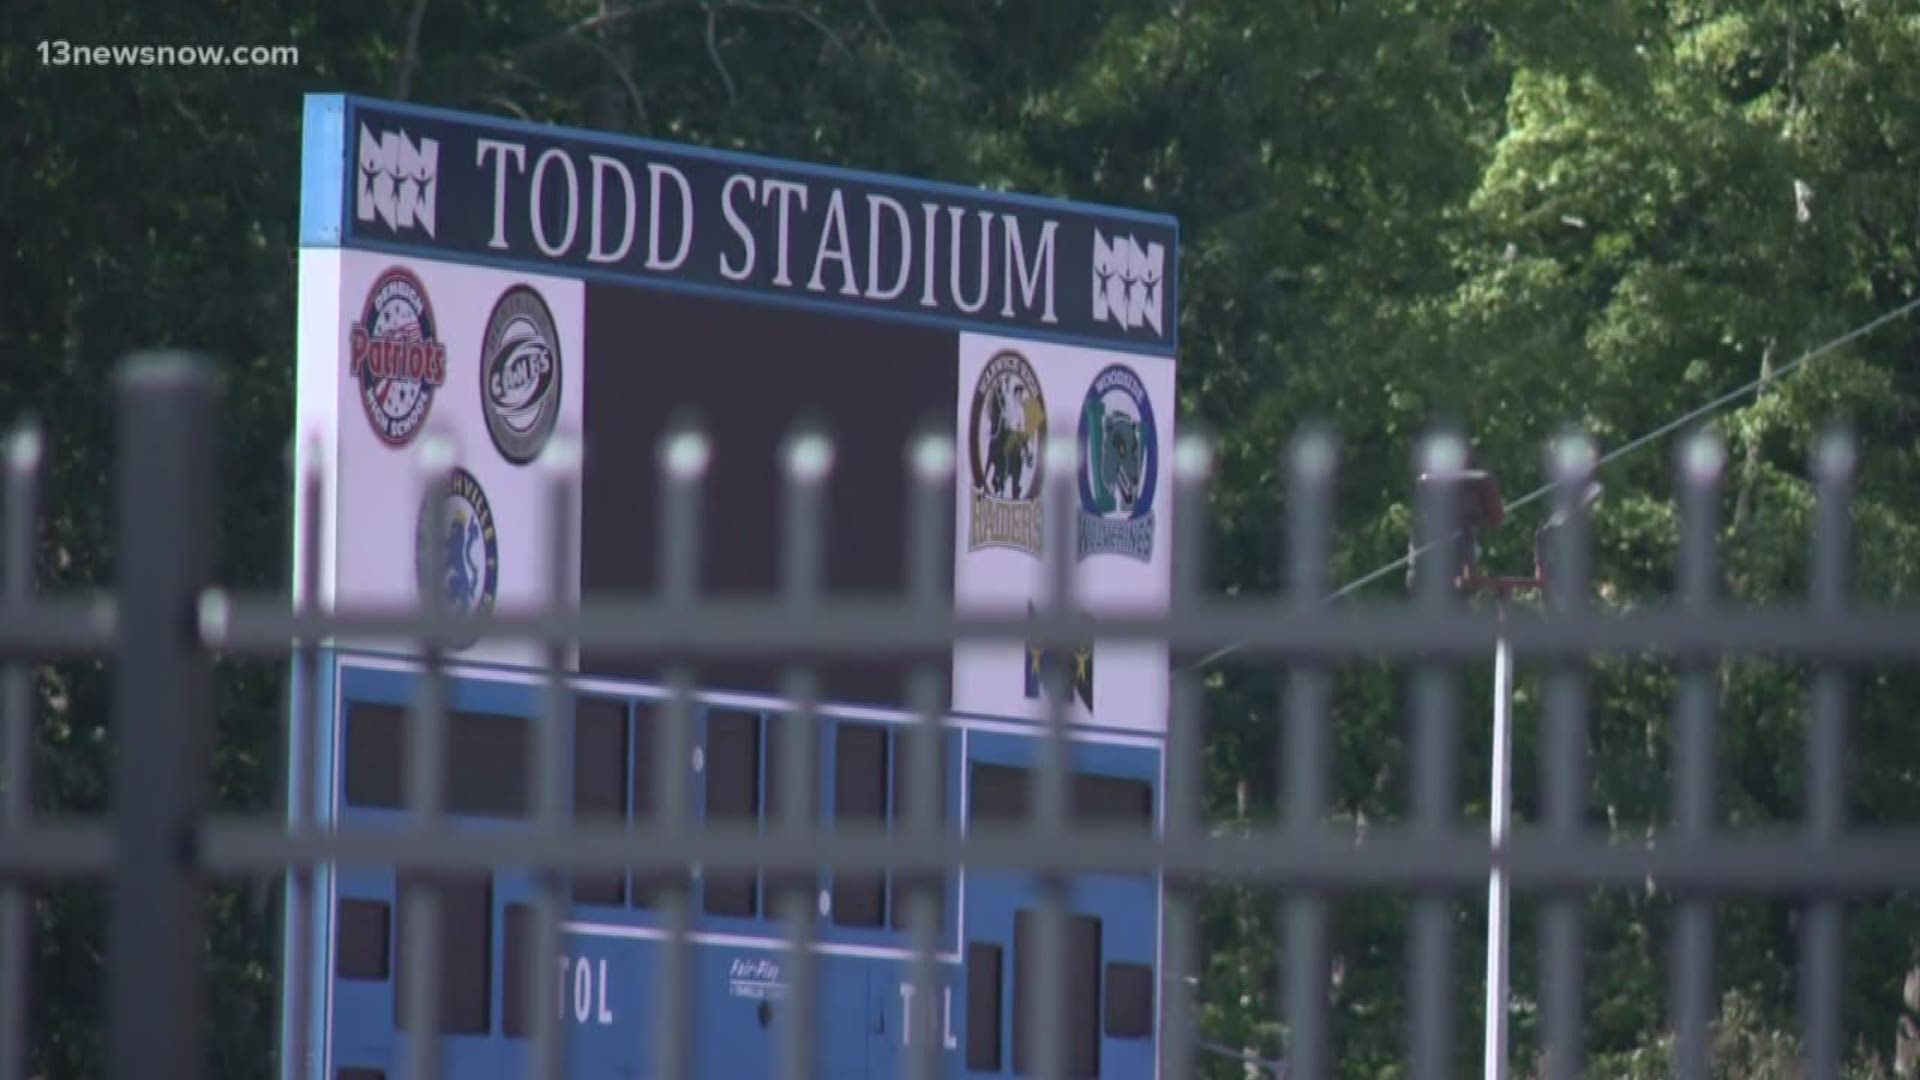 After three teens were shot near Todd Stadium after a game, police are increasing their presence. They decided this will be in effect for the rest of the season.